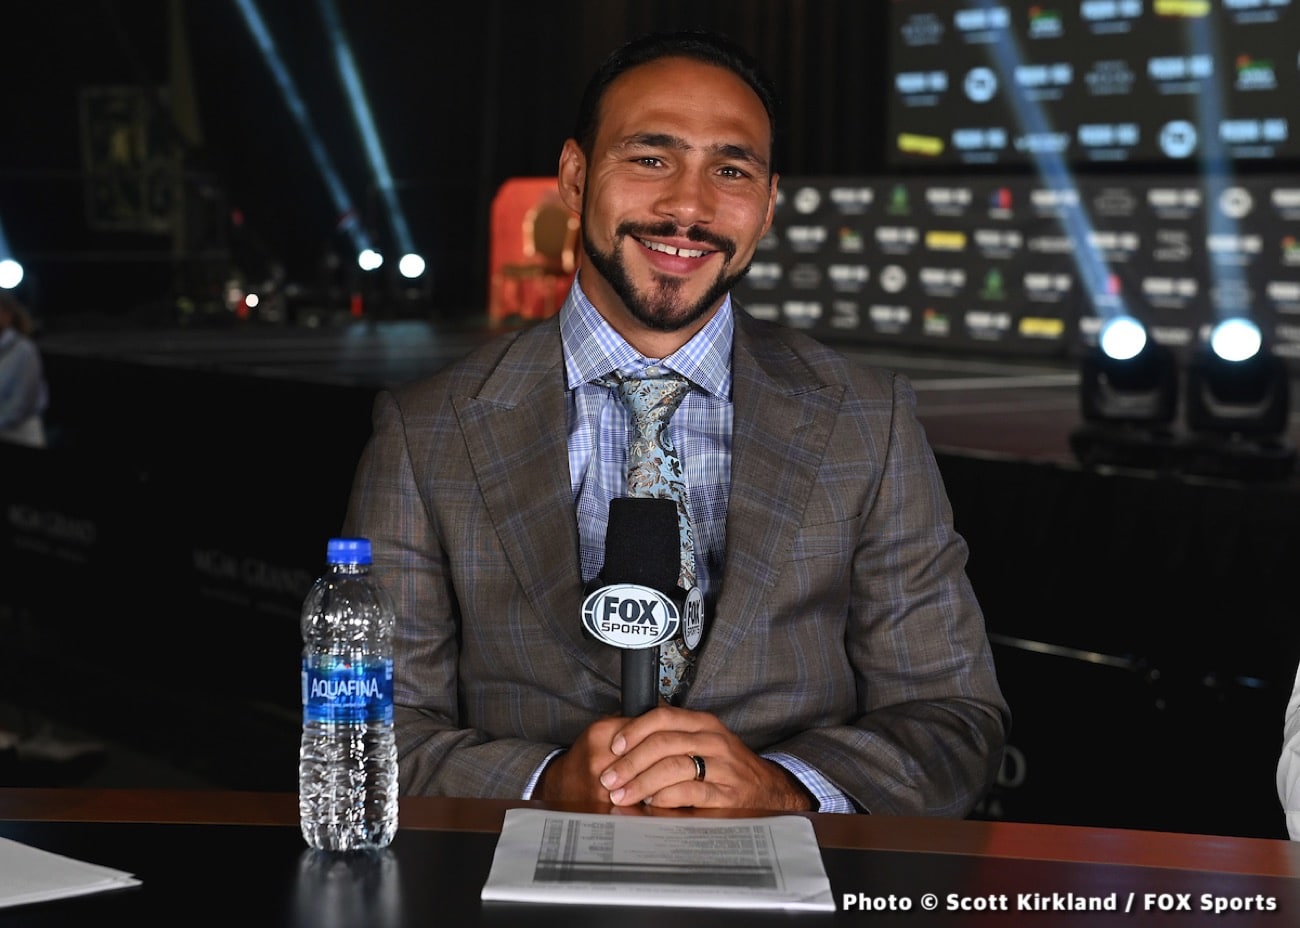 Keith Thurman says his next opponent will be announced soon